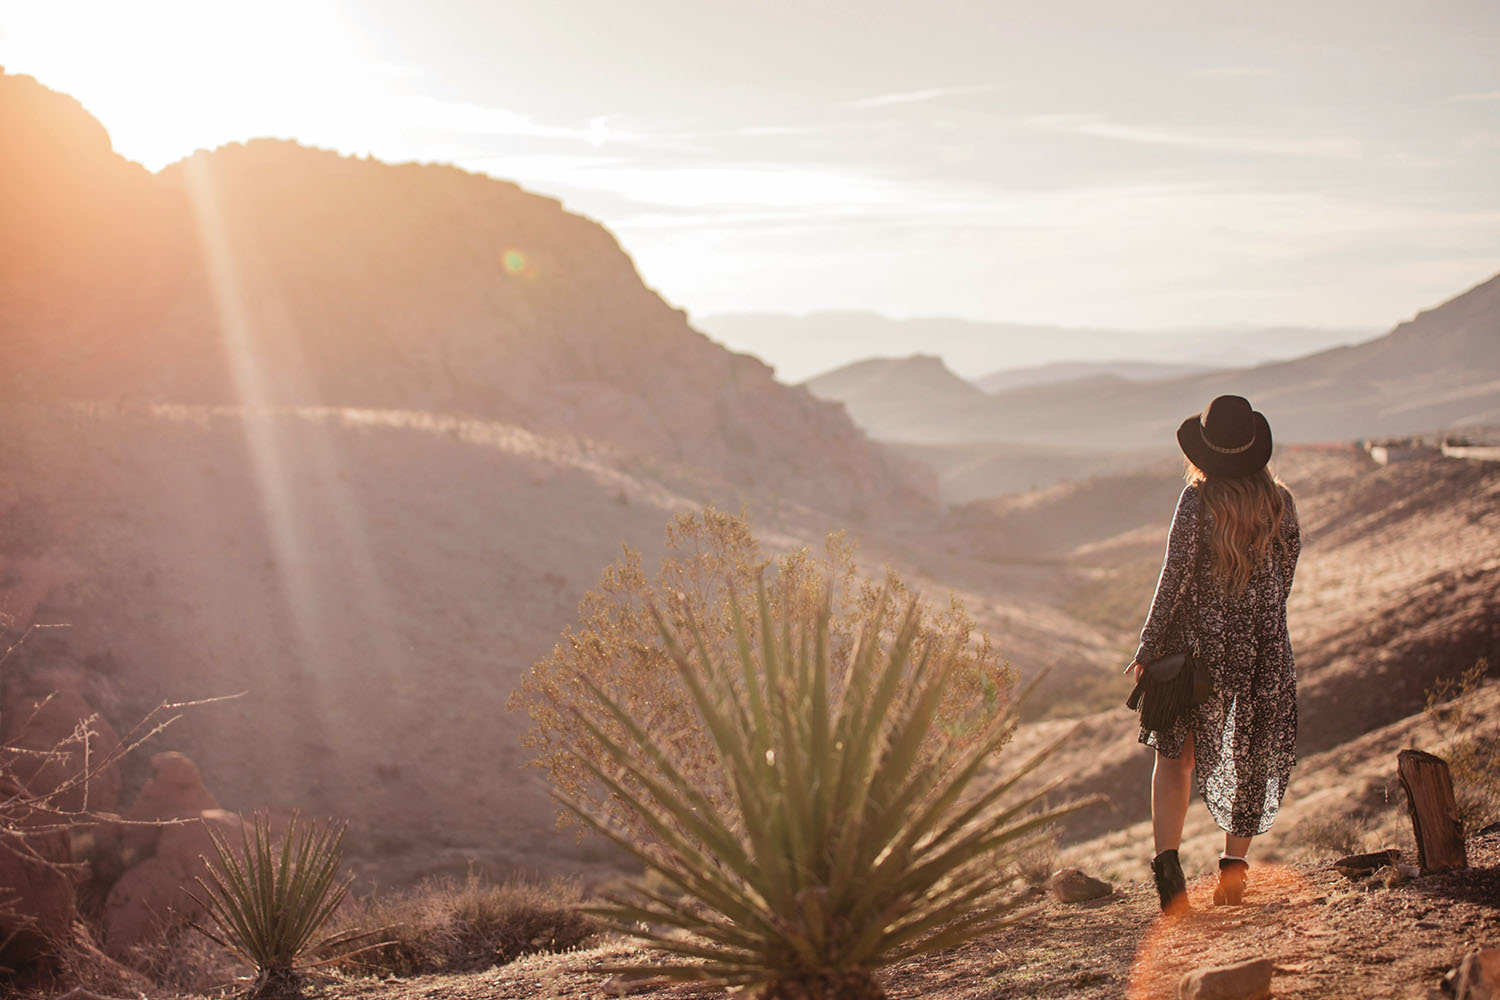 Boho Outfit in Red Rock Canyon Sunrise - Dress, Boots, Hat & Fringe Bag